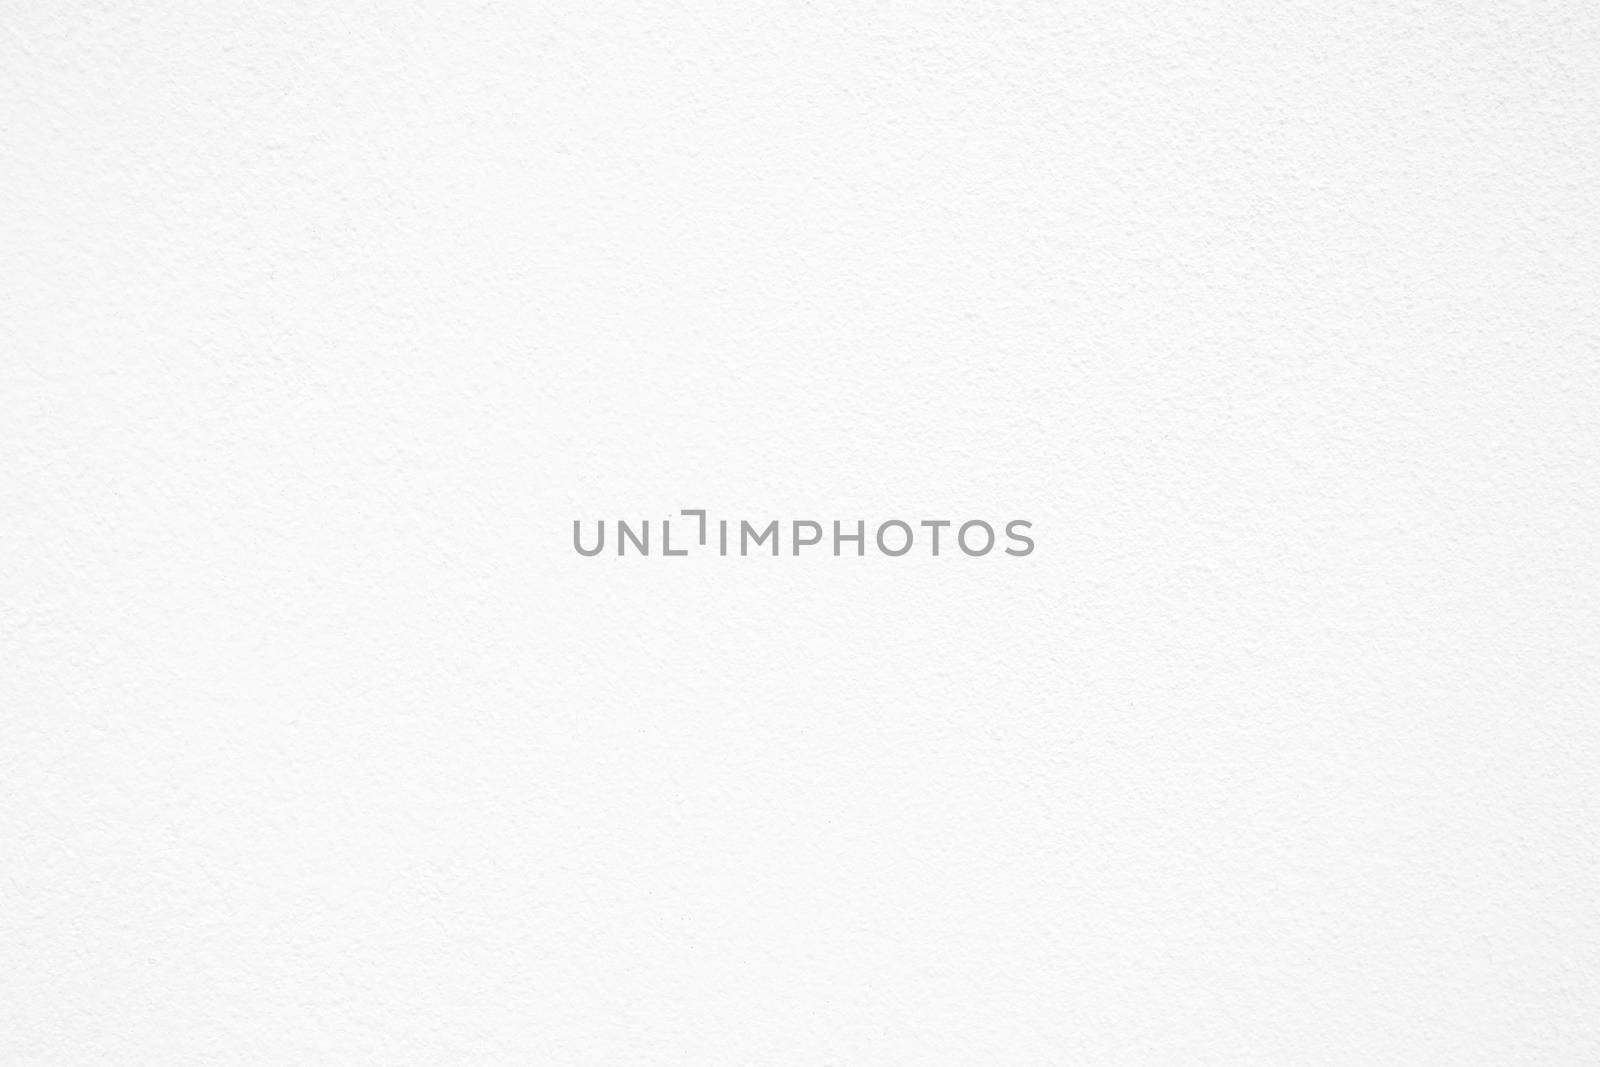 White Painting Concrete Wall Texture Background.